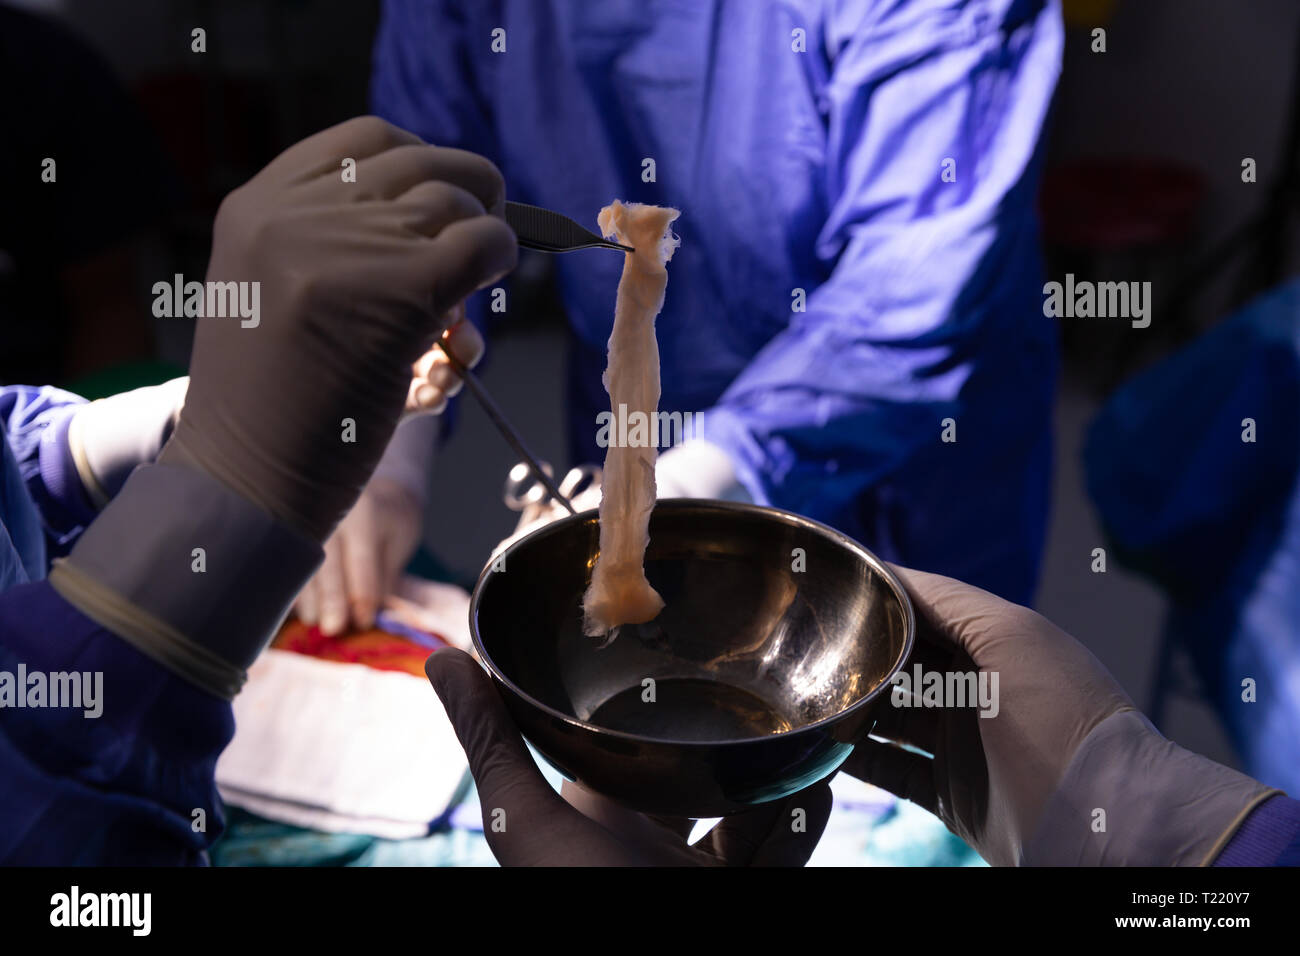 Surgeon hand putting a bit of human flesh in a bowl Stock Photo